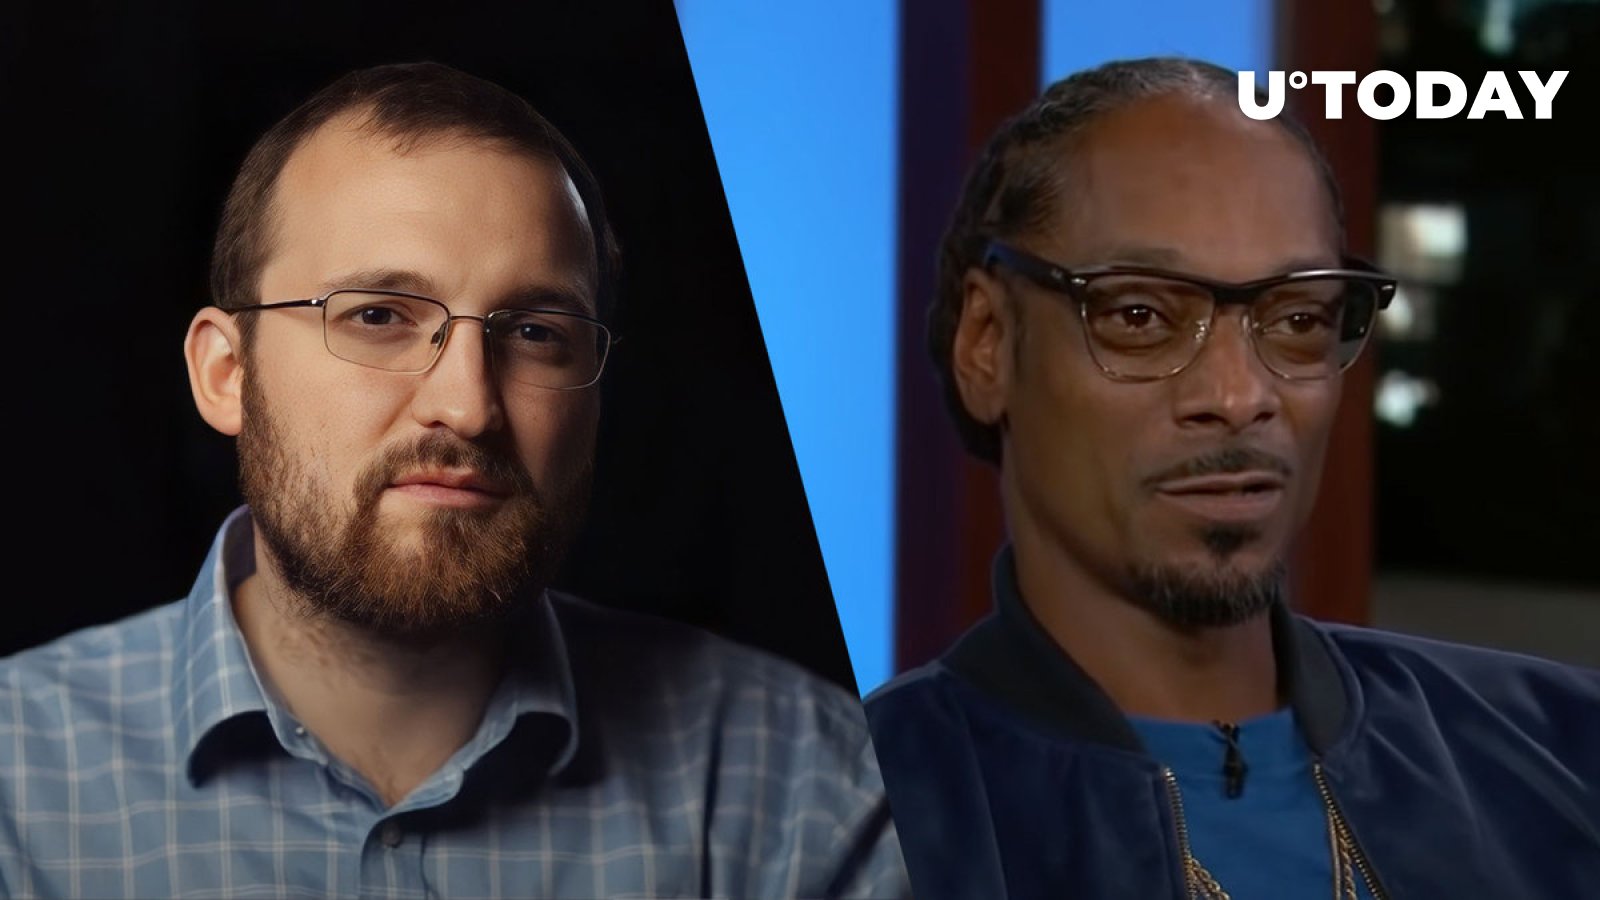 Cardano Founder’s Photo with Snoop Dogg Boosts Cardano NFT Sales by 33%